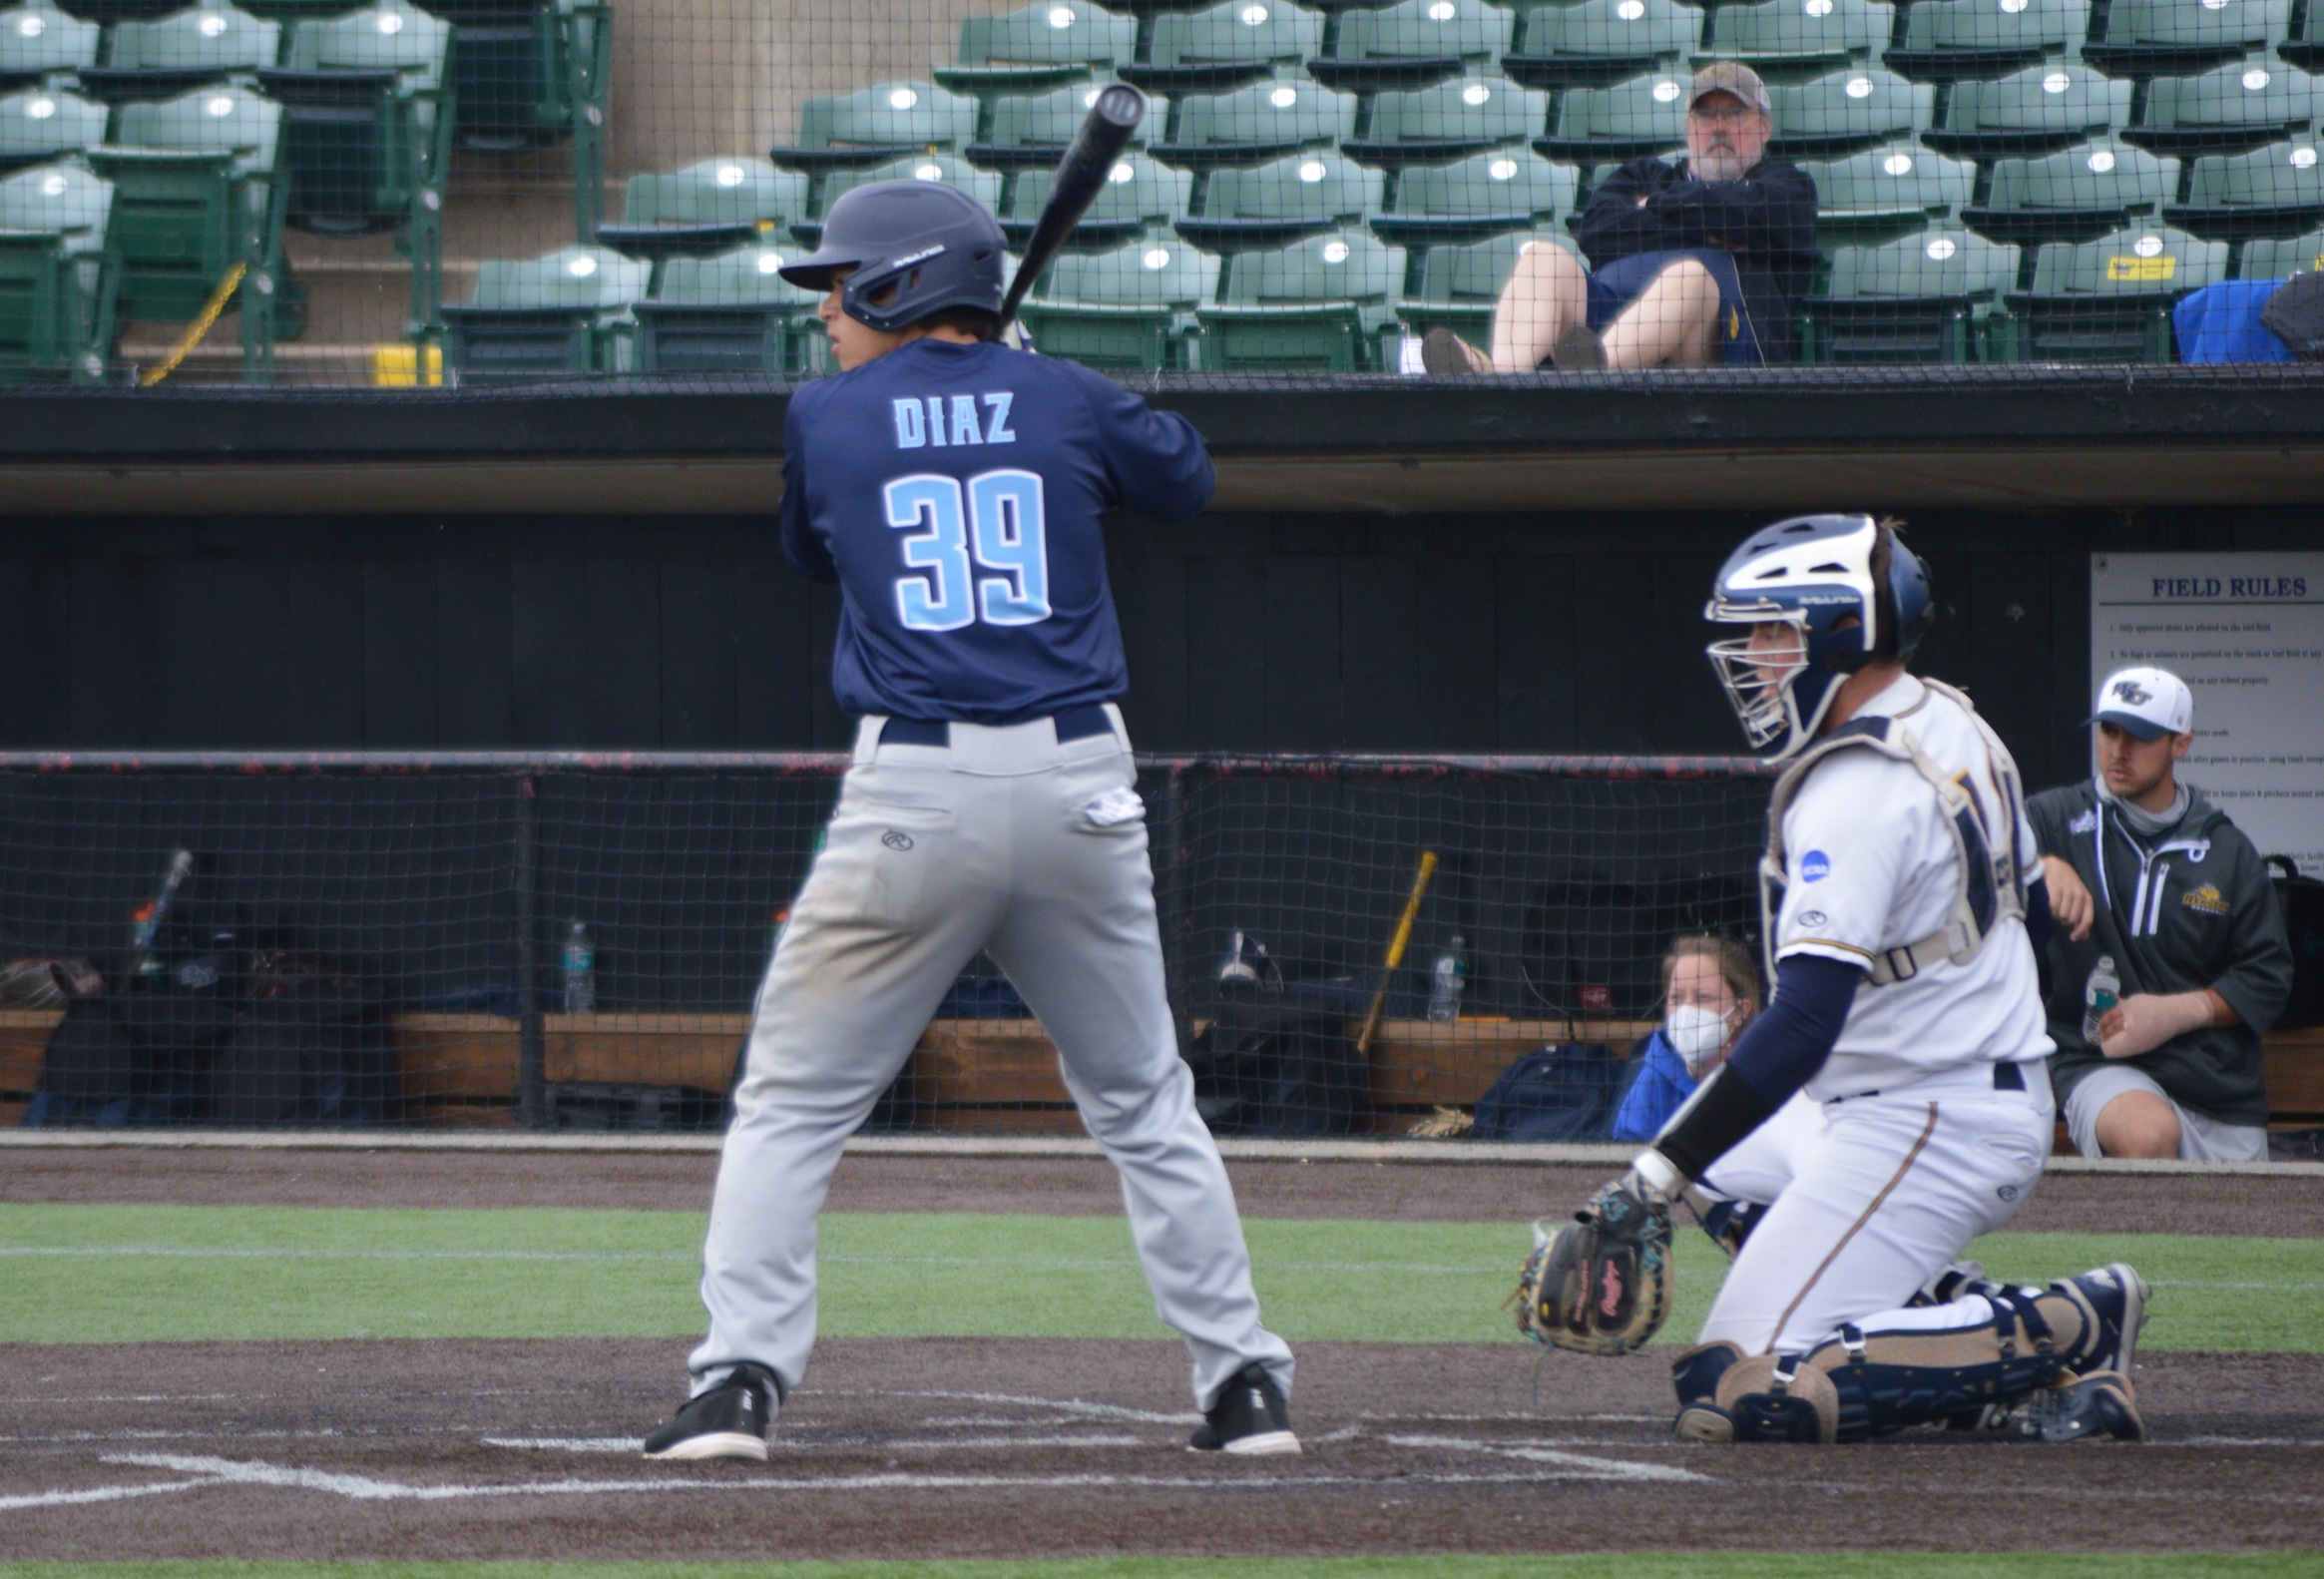 39 Steven Diaz, the Blue Jay lead off hitter, went 1-4 with the only RBI for the Blue Jays on Saturday.